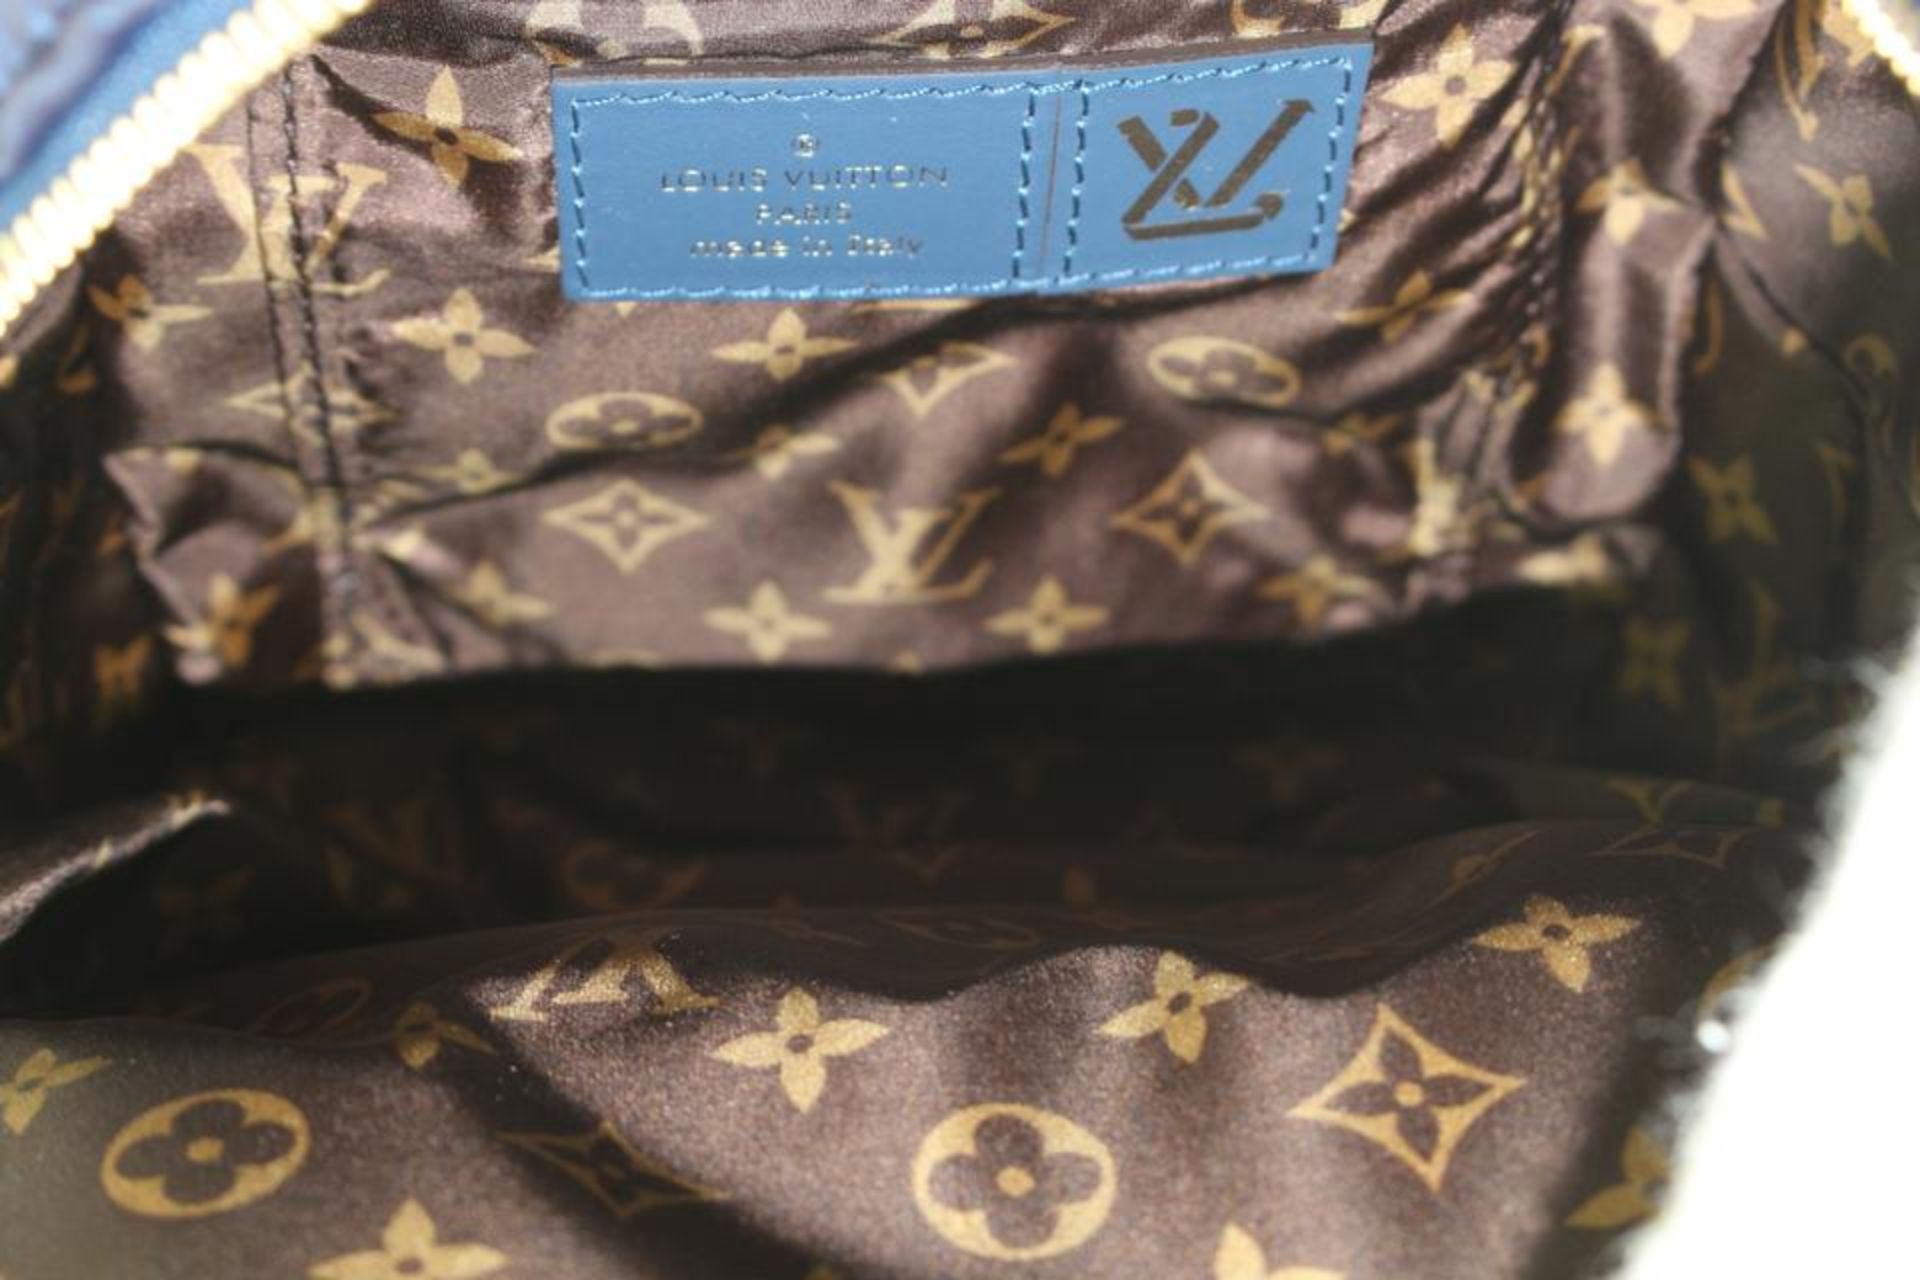 LOUIS VUITTON RARE 2023 PUFFER PILLOW PALM SPRING MINI BACKPACK - Image 10 of 11